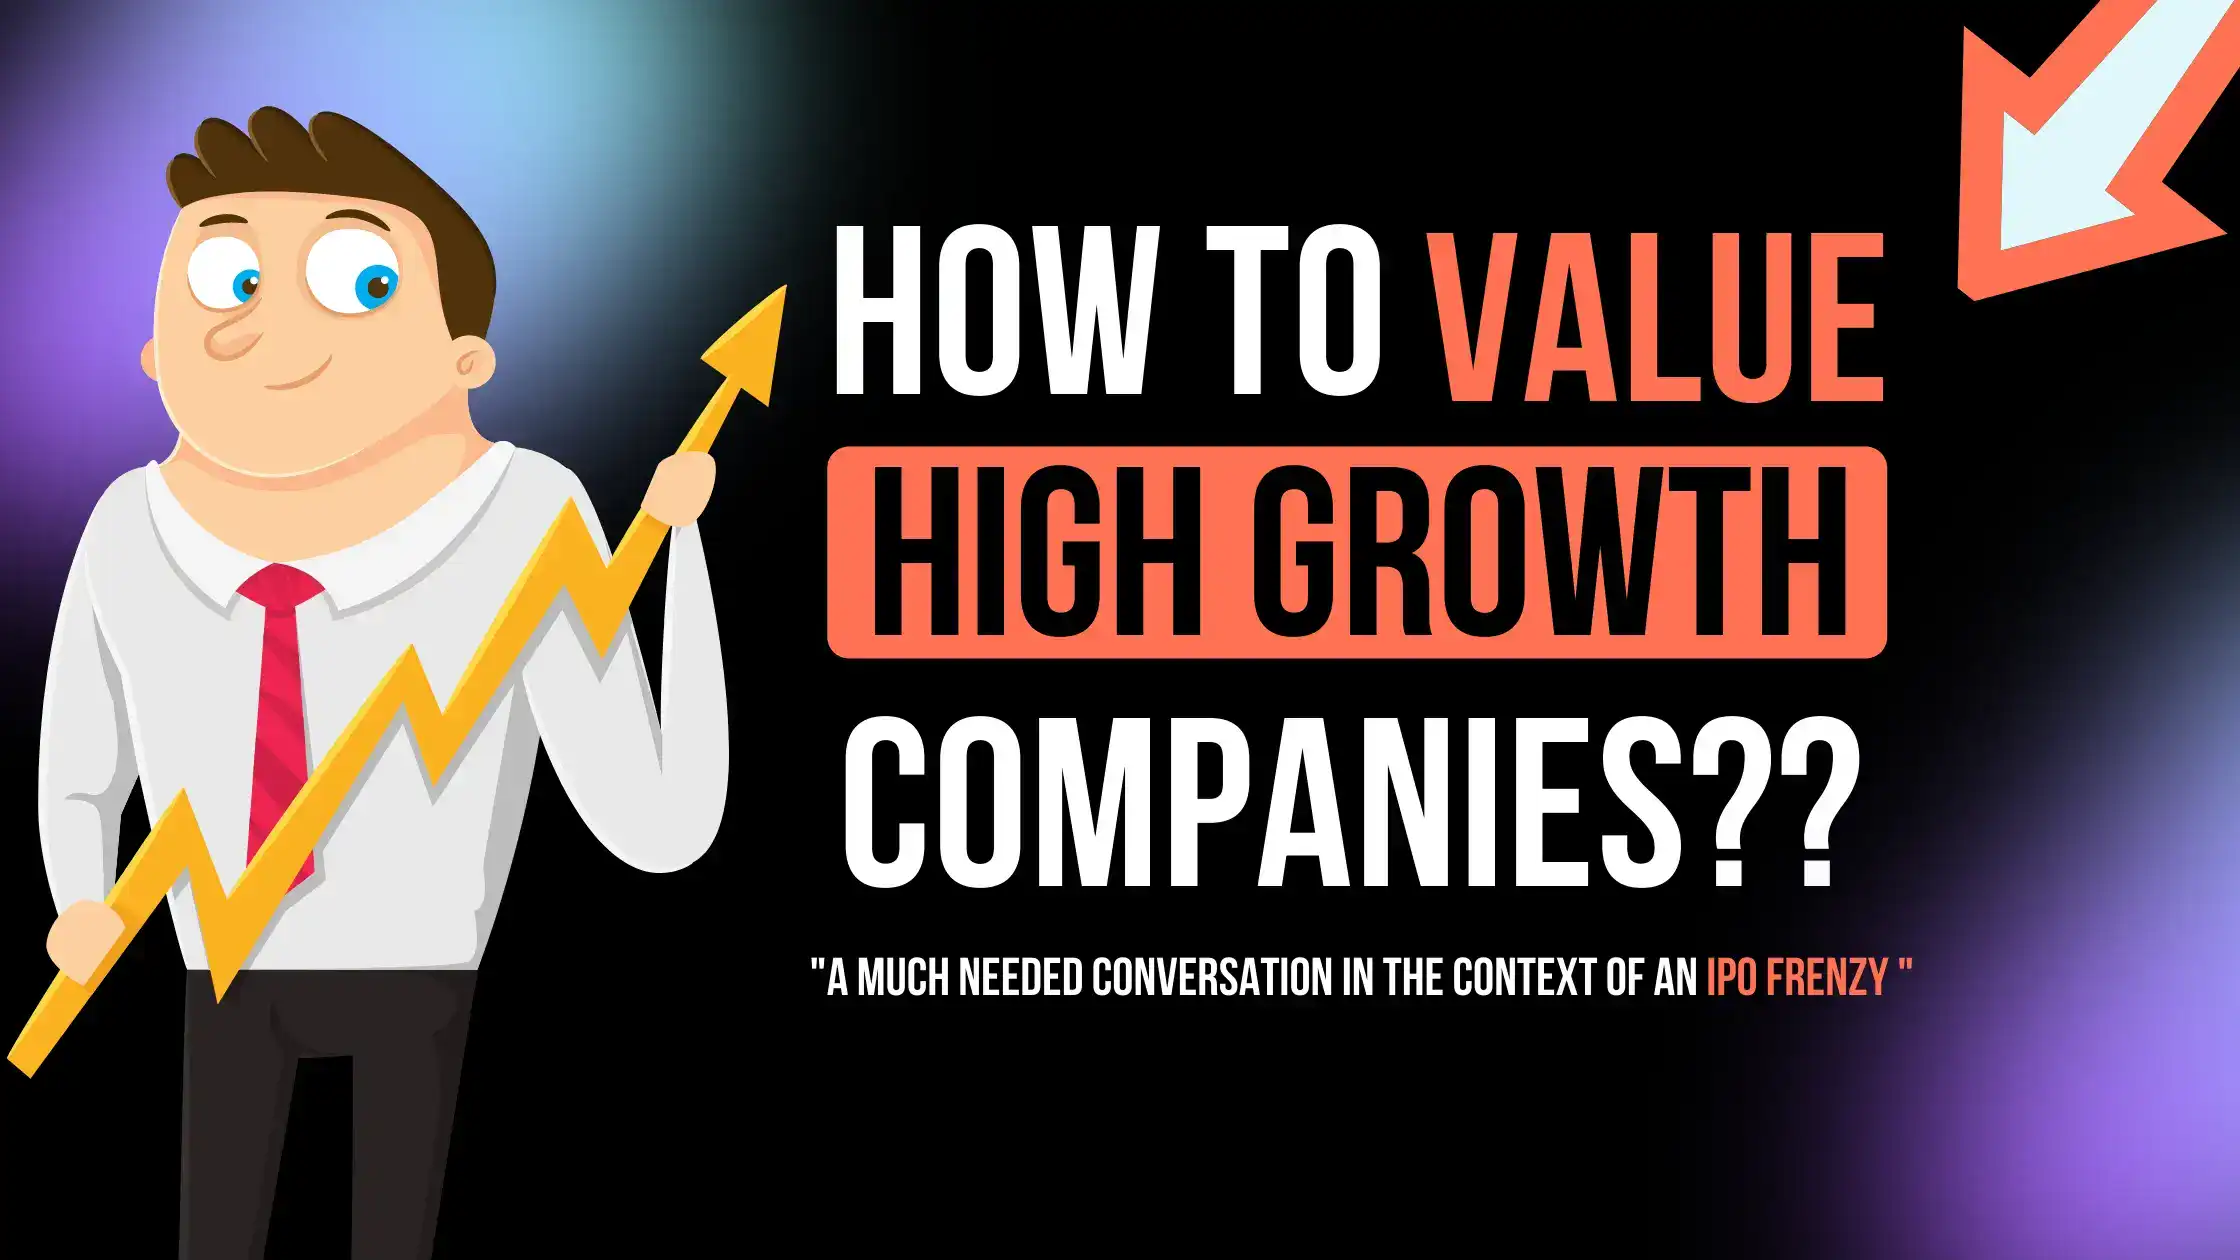 Find out how high-growth companies are valued Uncover investment gems with expert insights Dive in now to navigate the complex world of high-growth companies valuations.